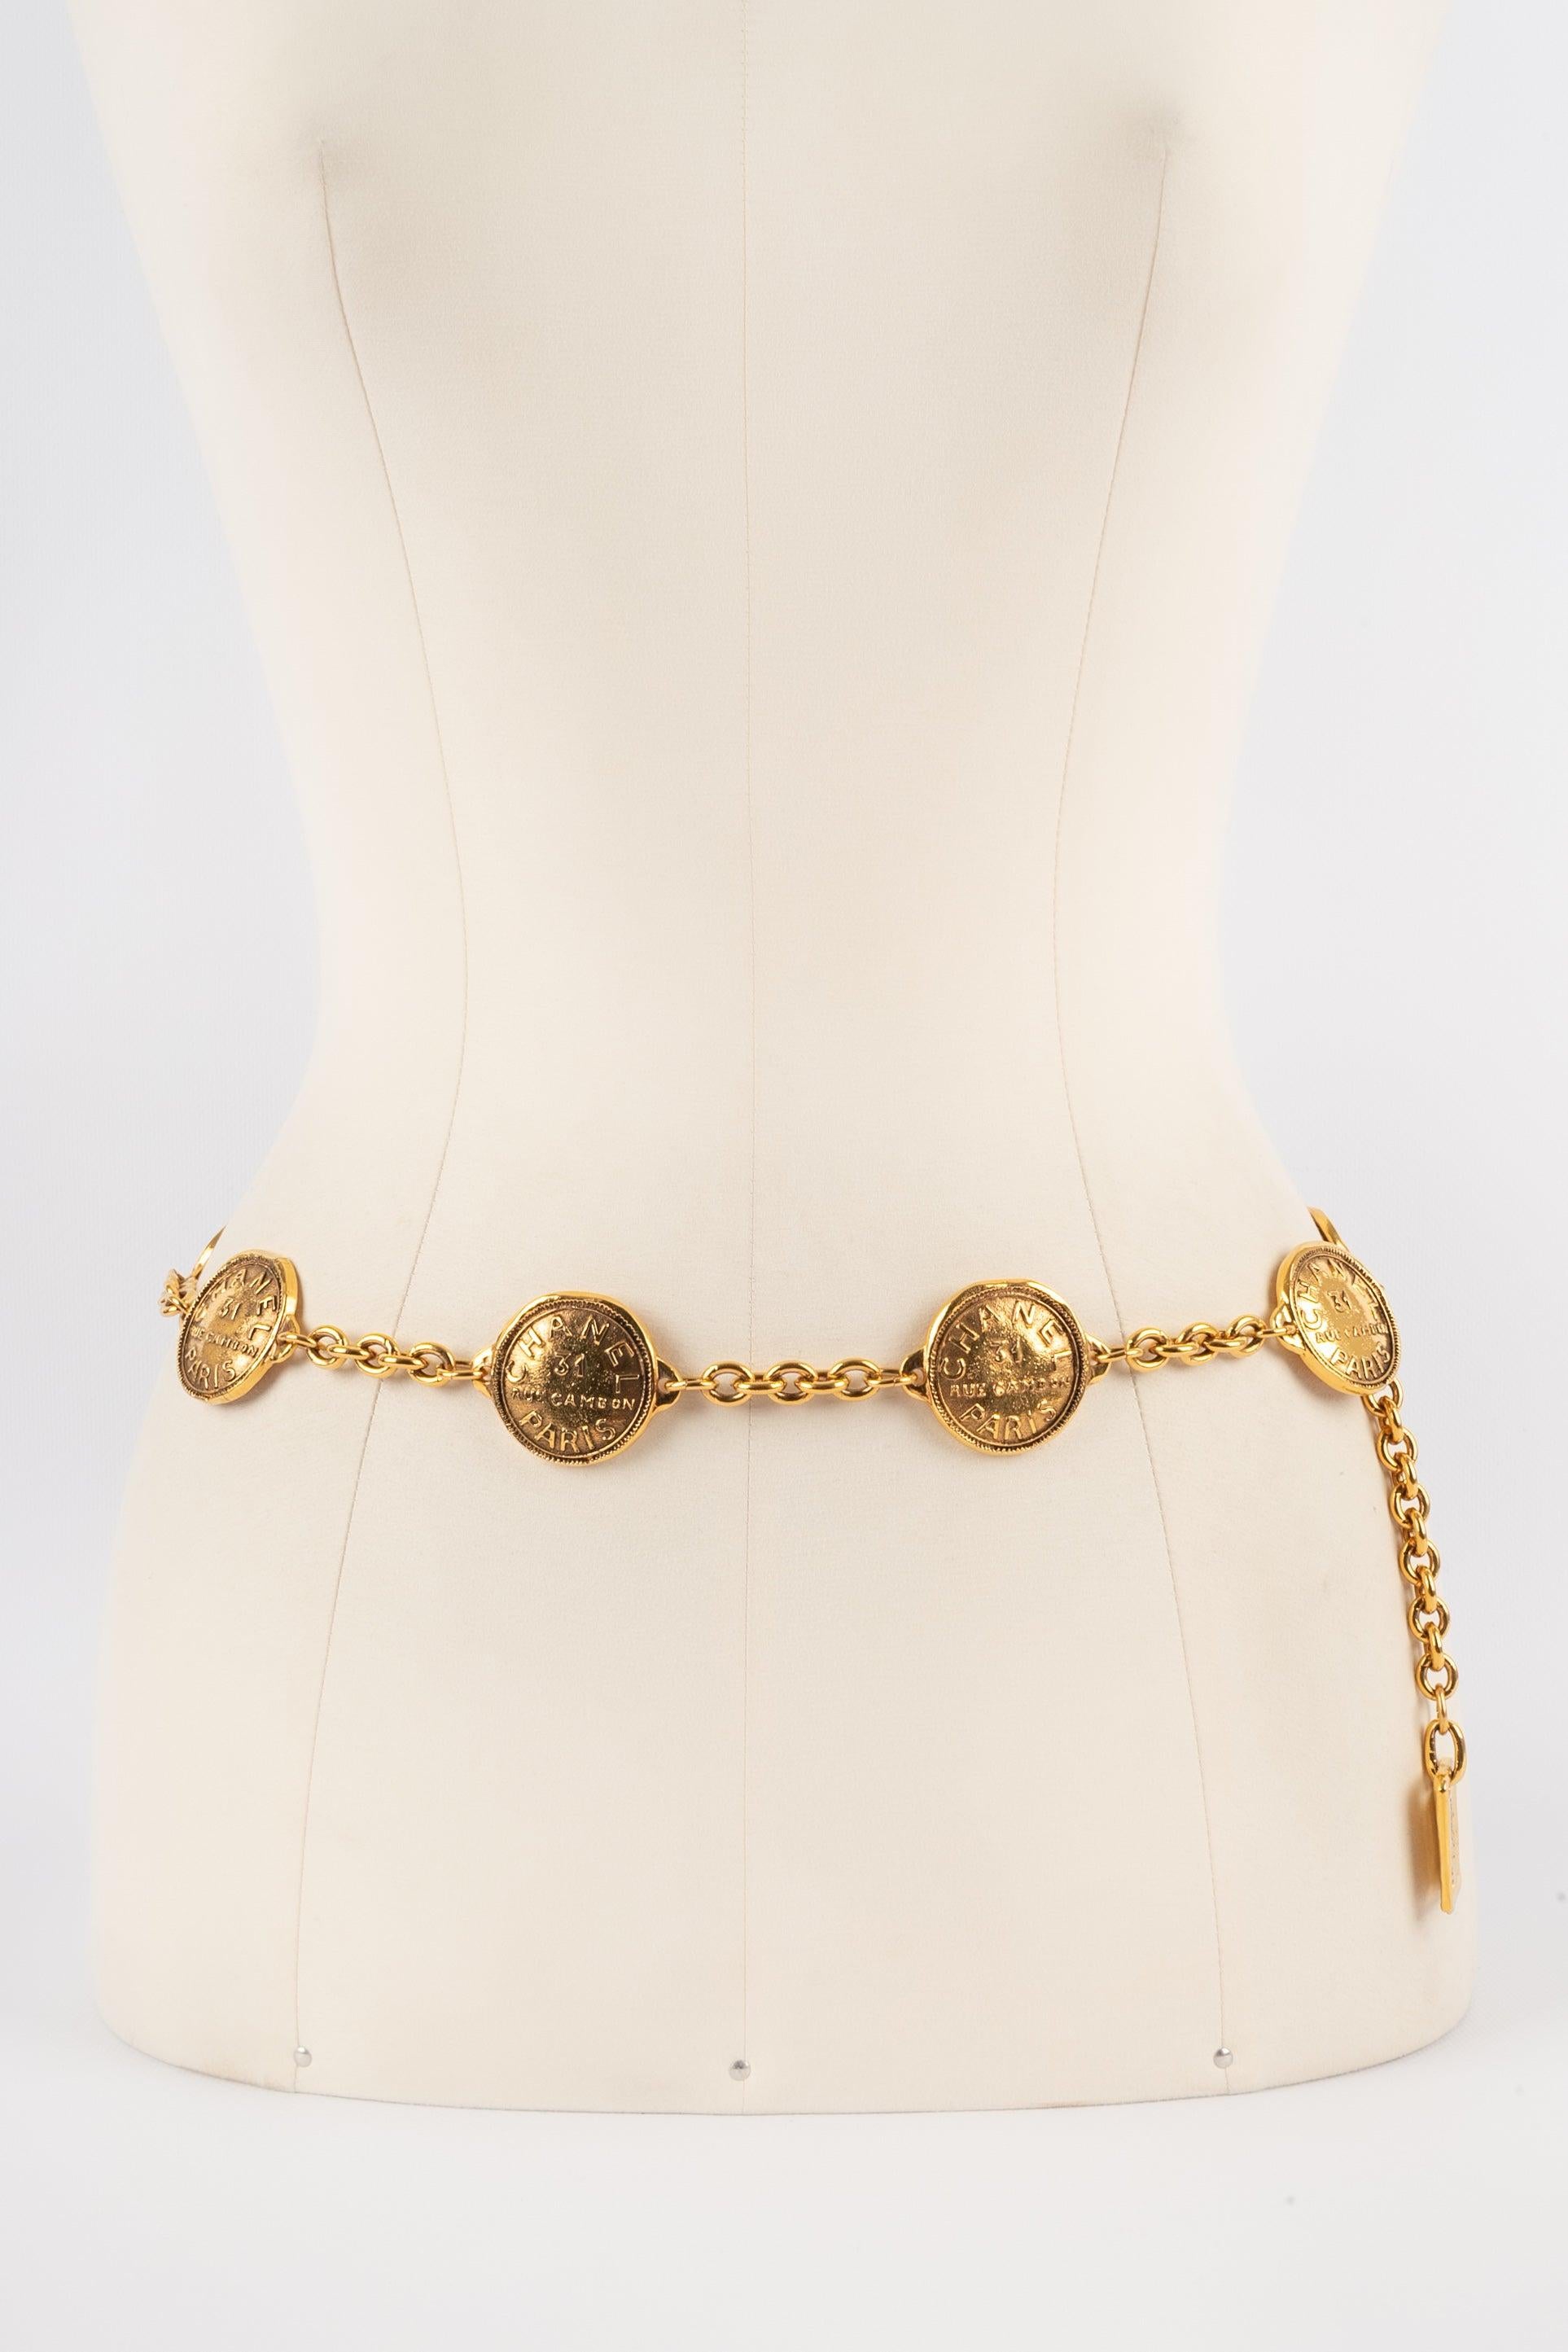 Women's Chanel Belt of Chains and Medallions Representing Coins, 1980s For Sale